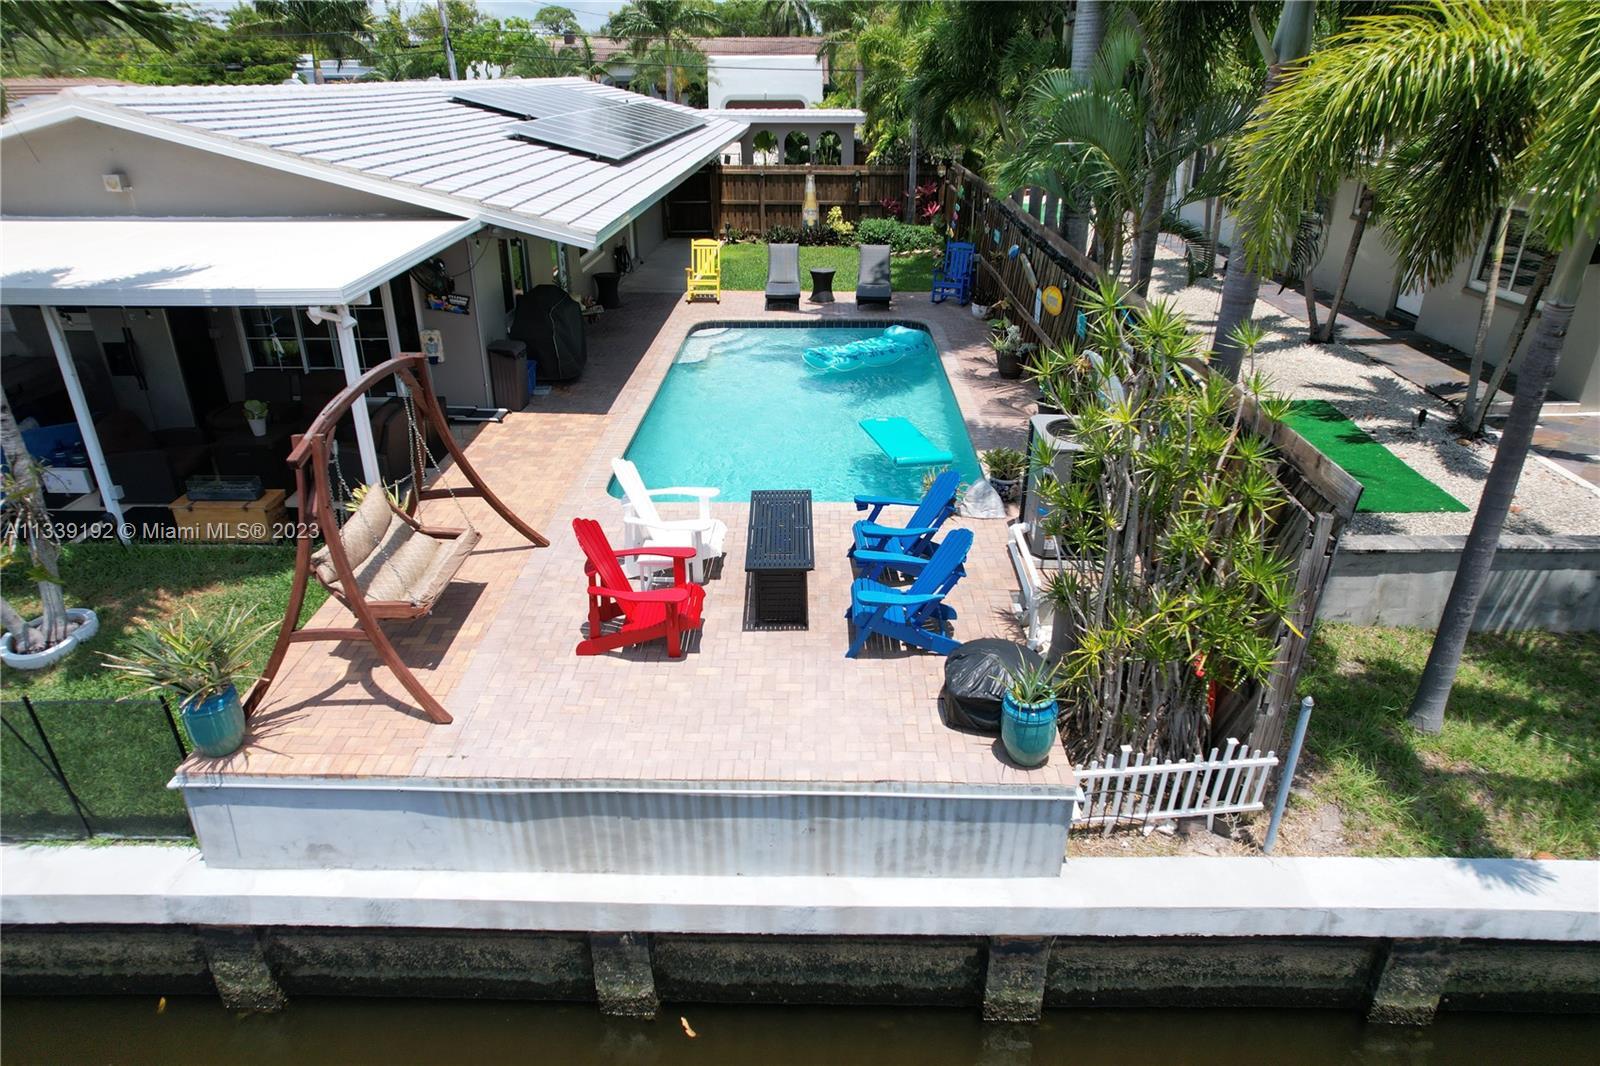 Three-unit waterfront AirBnB pool home. Income potential to approx $27k per month in high season. Wa